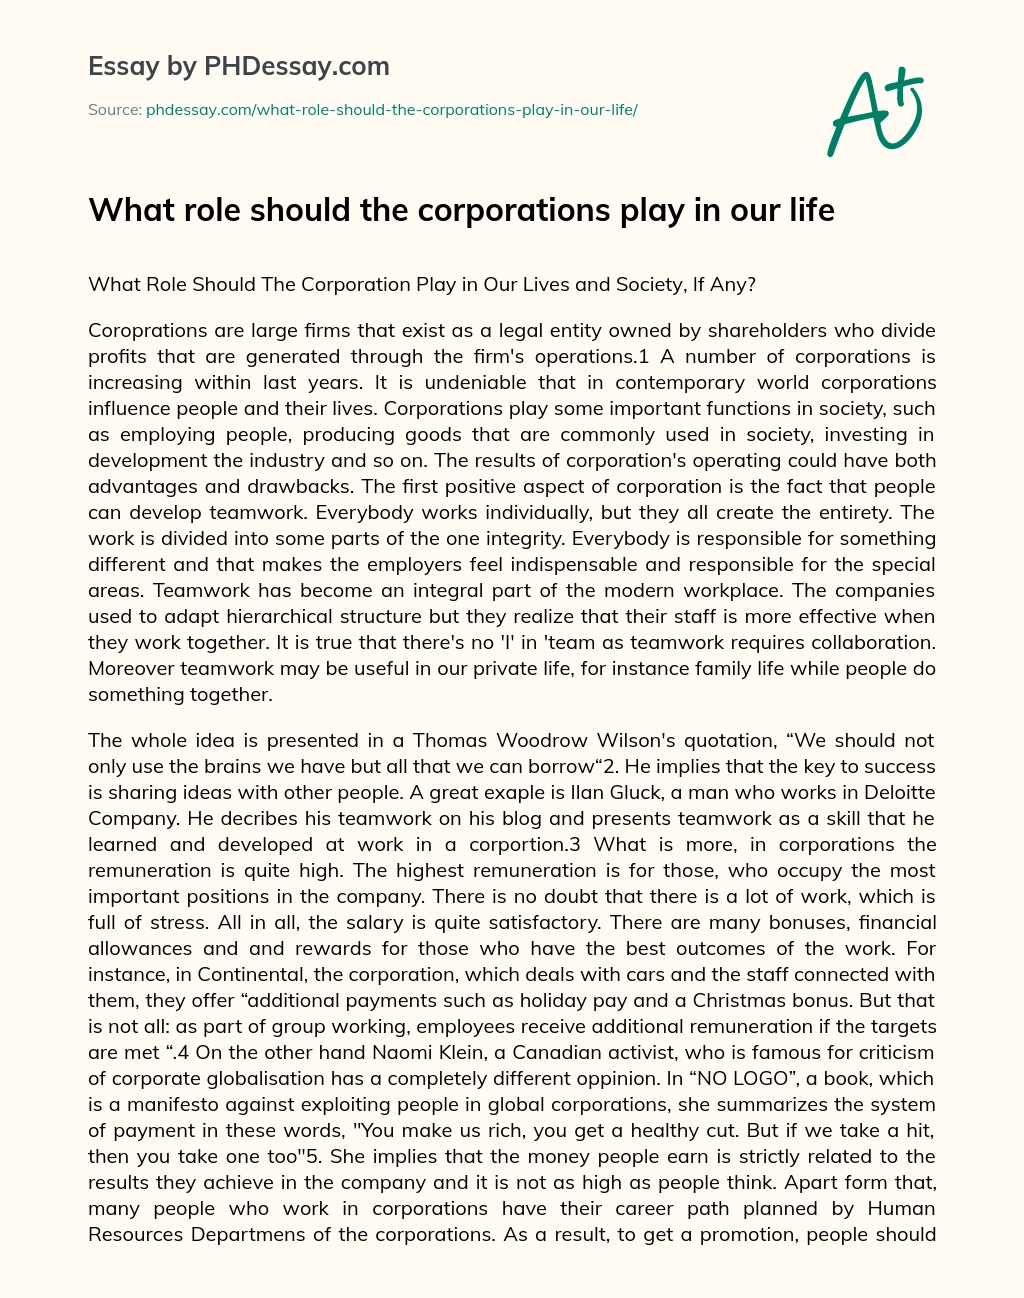 What role should the corporations play in our life essay